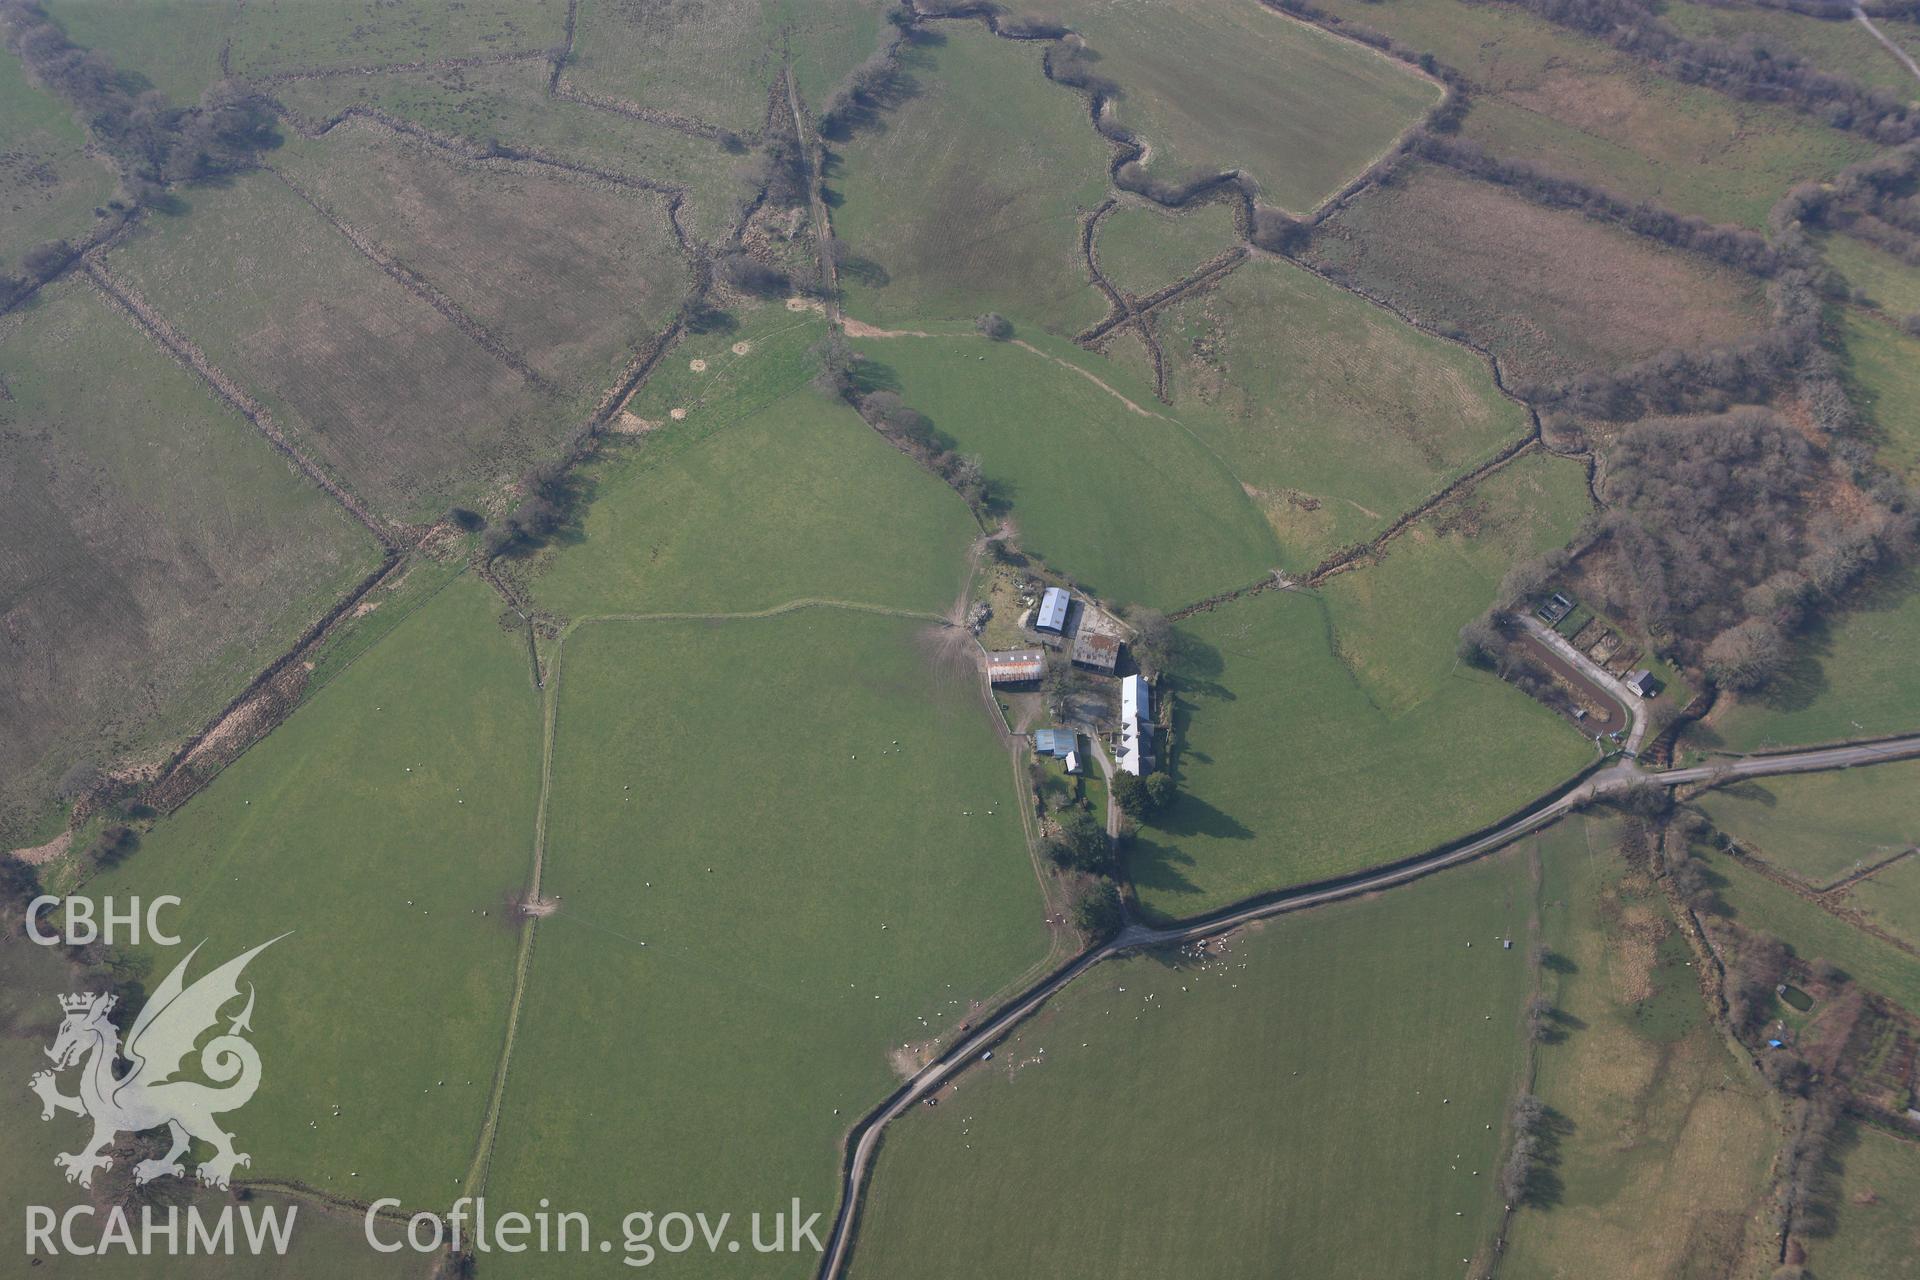 RCAHMW colour oblique photograph of Cefn Caer Roman Fort. Taken by Toby Driver on 25/03/2011.